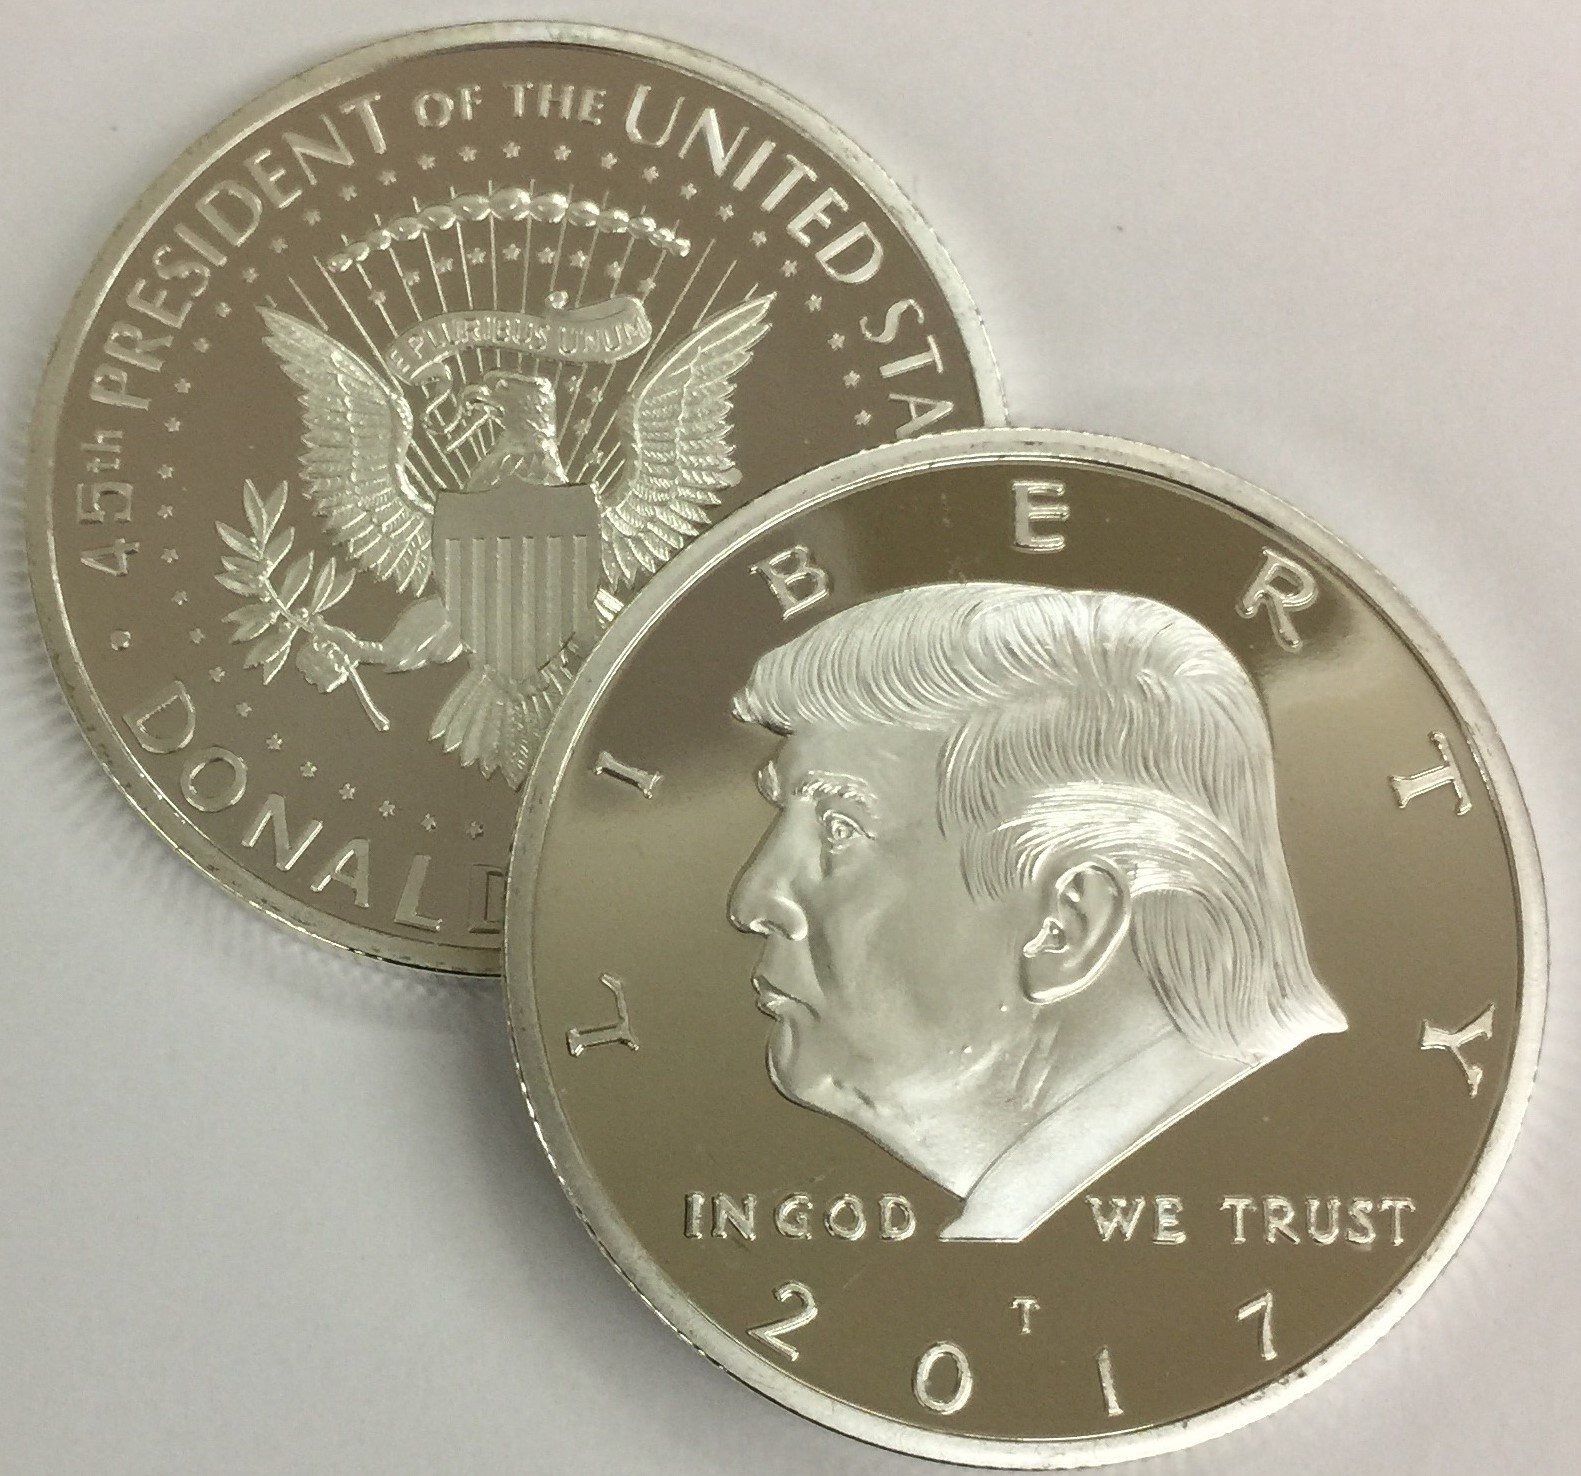 2017 New President Donald Trump Silver Plated EAGLE Commemorative Coin Novelty